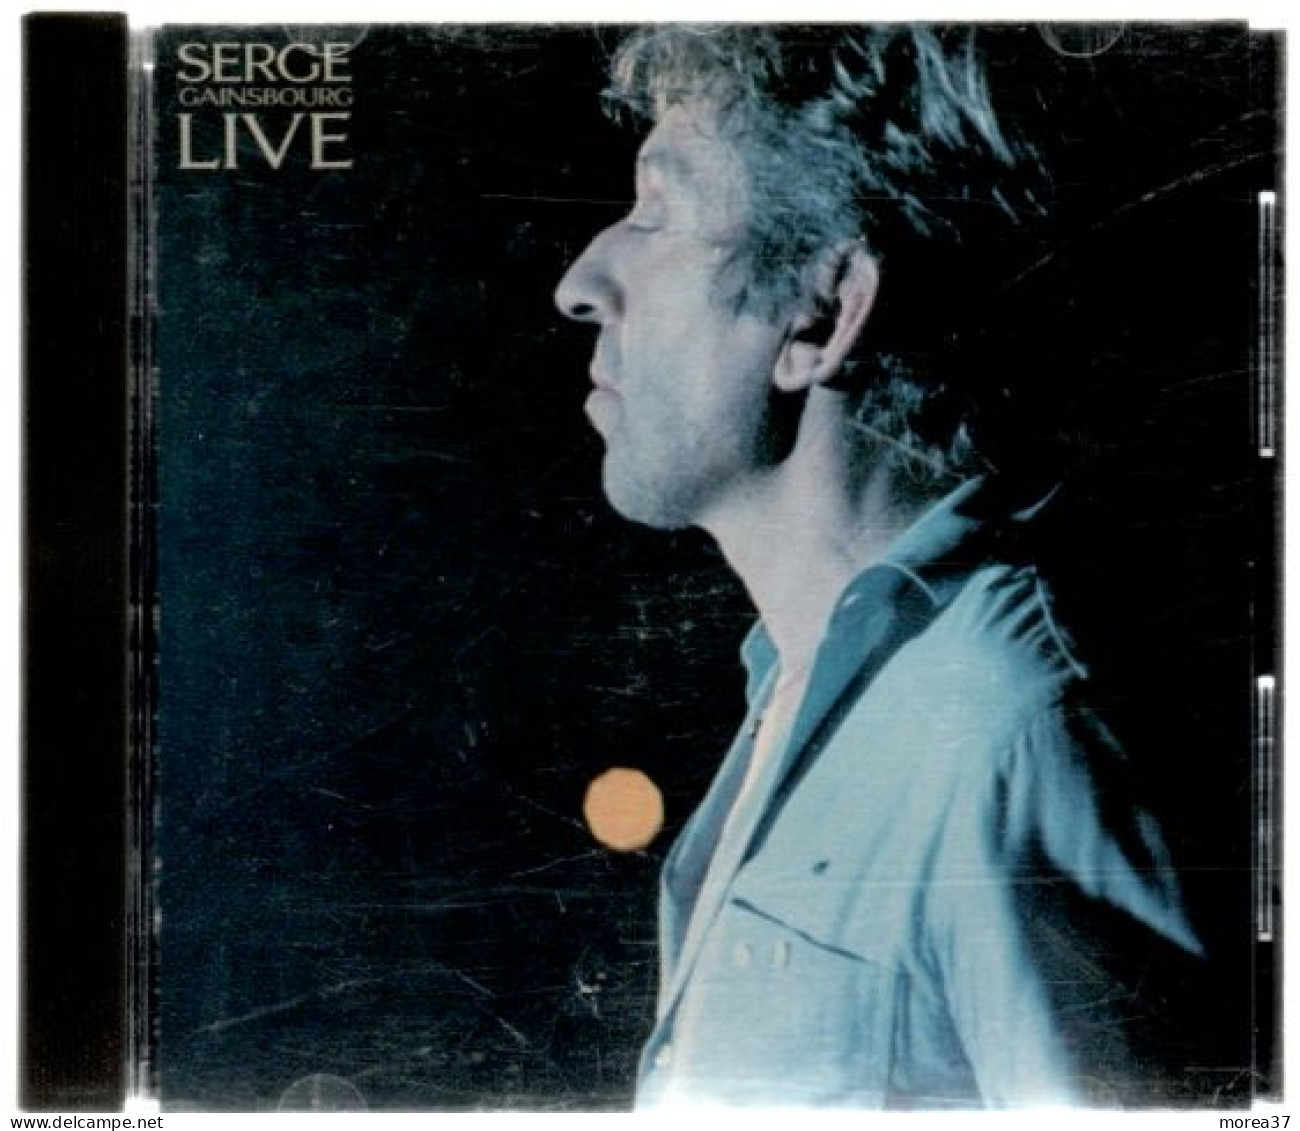 SERGE GAINSBOURG LIVE     (CD 03) - Other - French Music